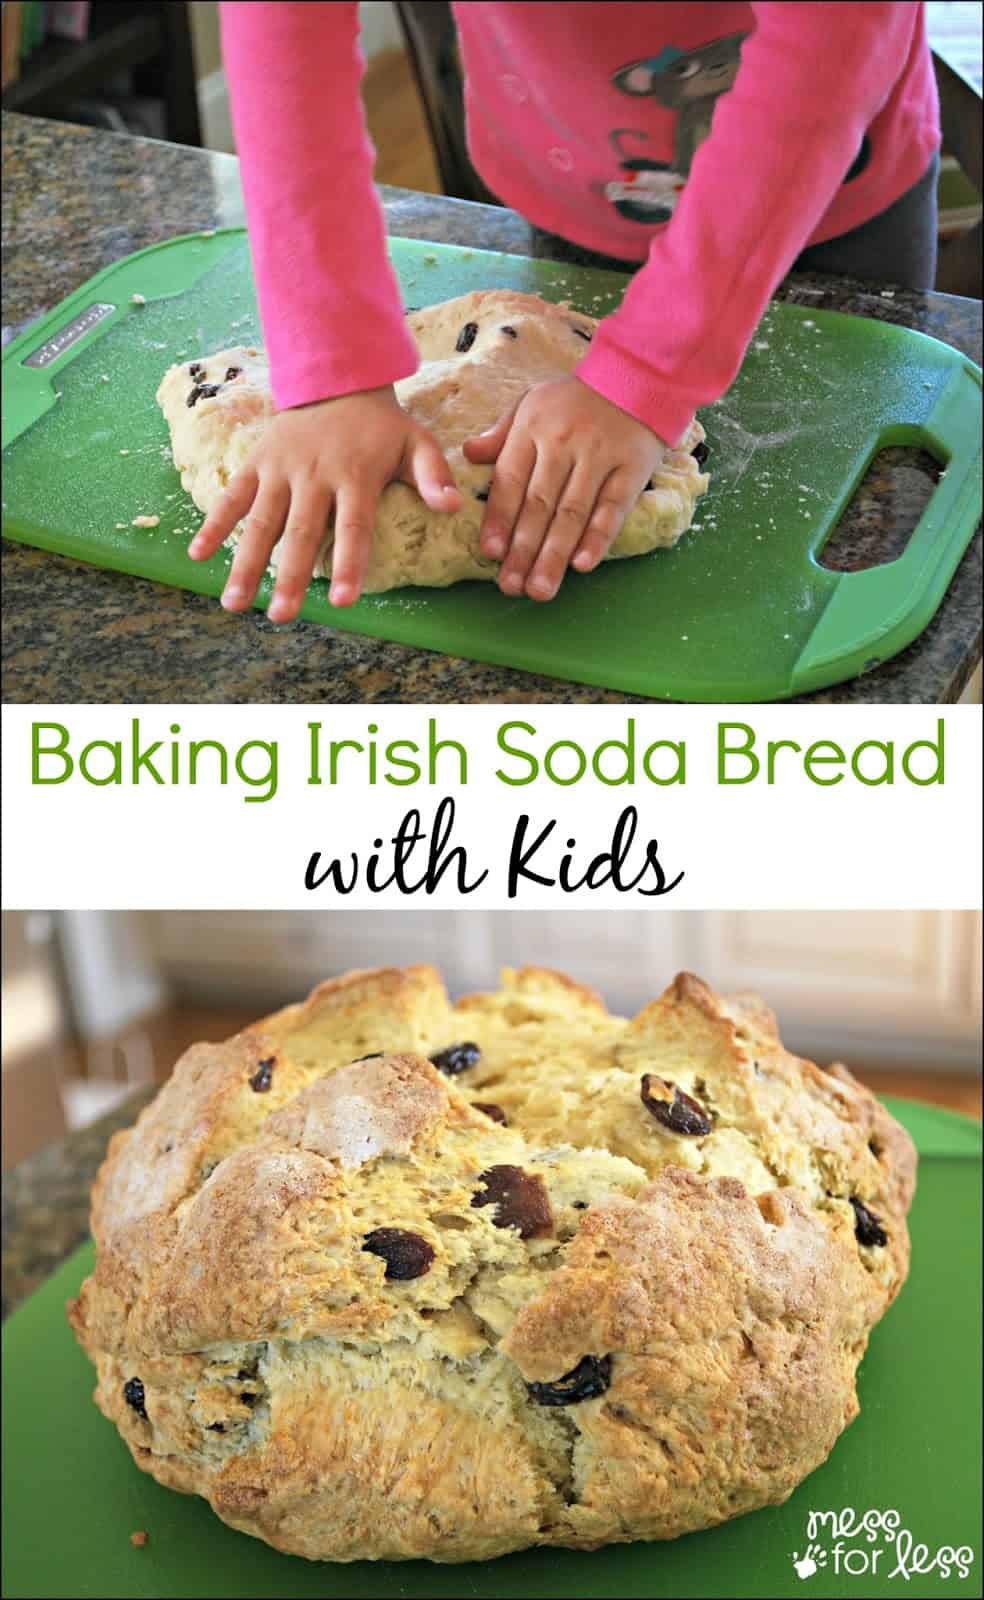 This Irish Soda Bread Recipe is perfect to make with kids as you get into the spirit of St. Patrick's Day. 